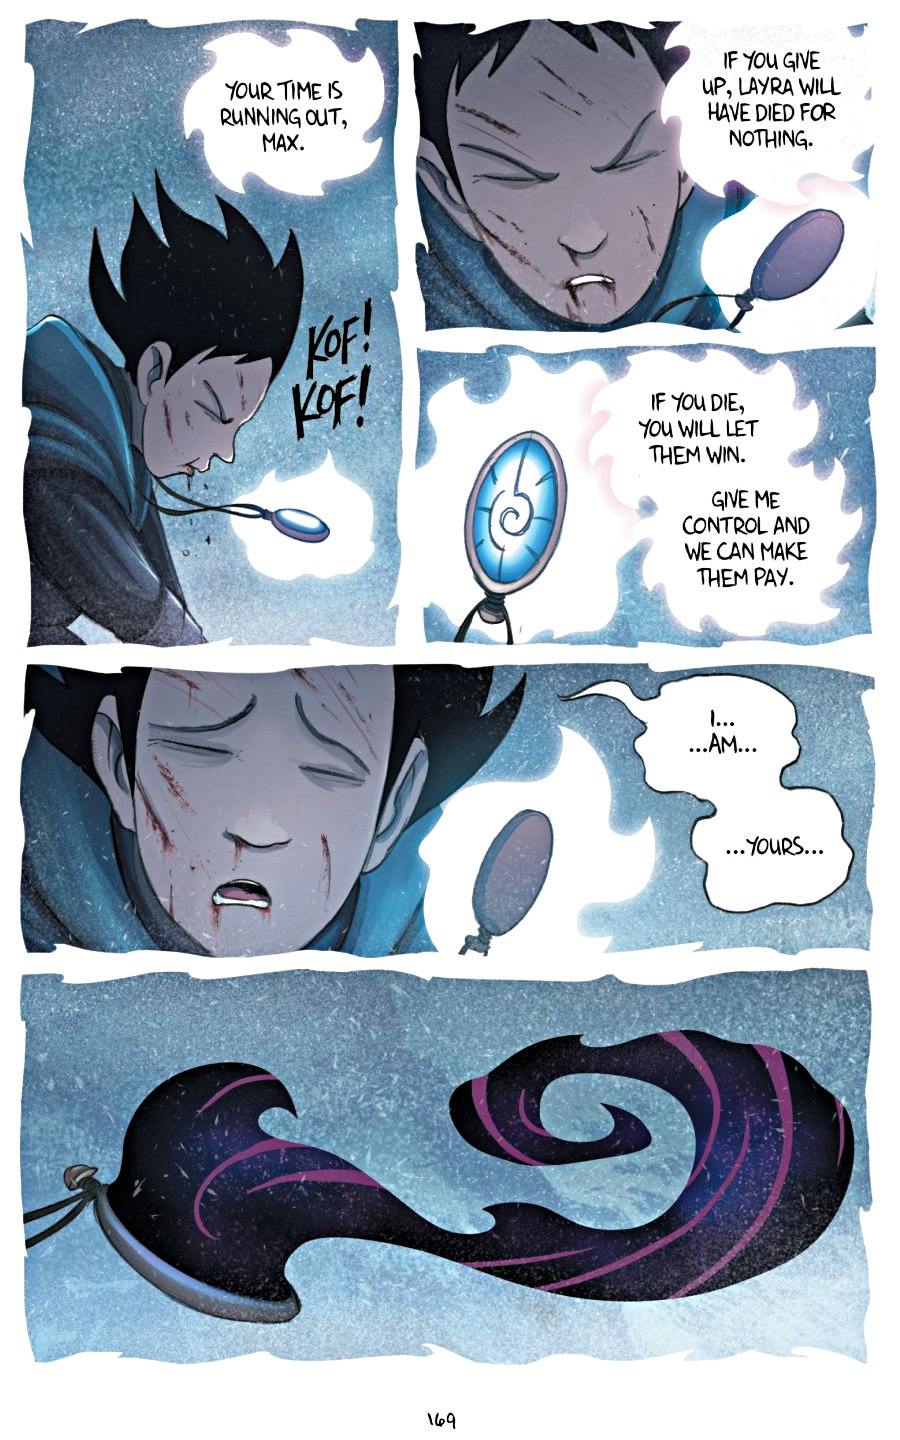 page 169 of amulet 5 prince of the elves graphic novel